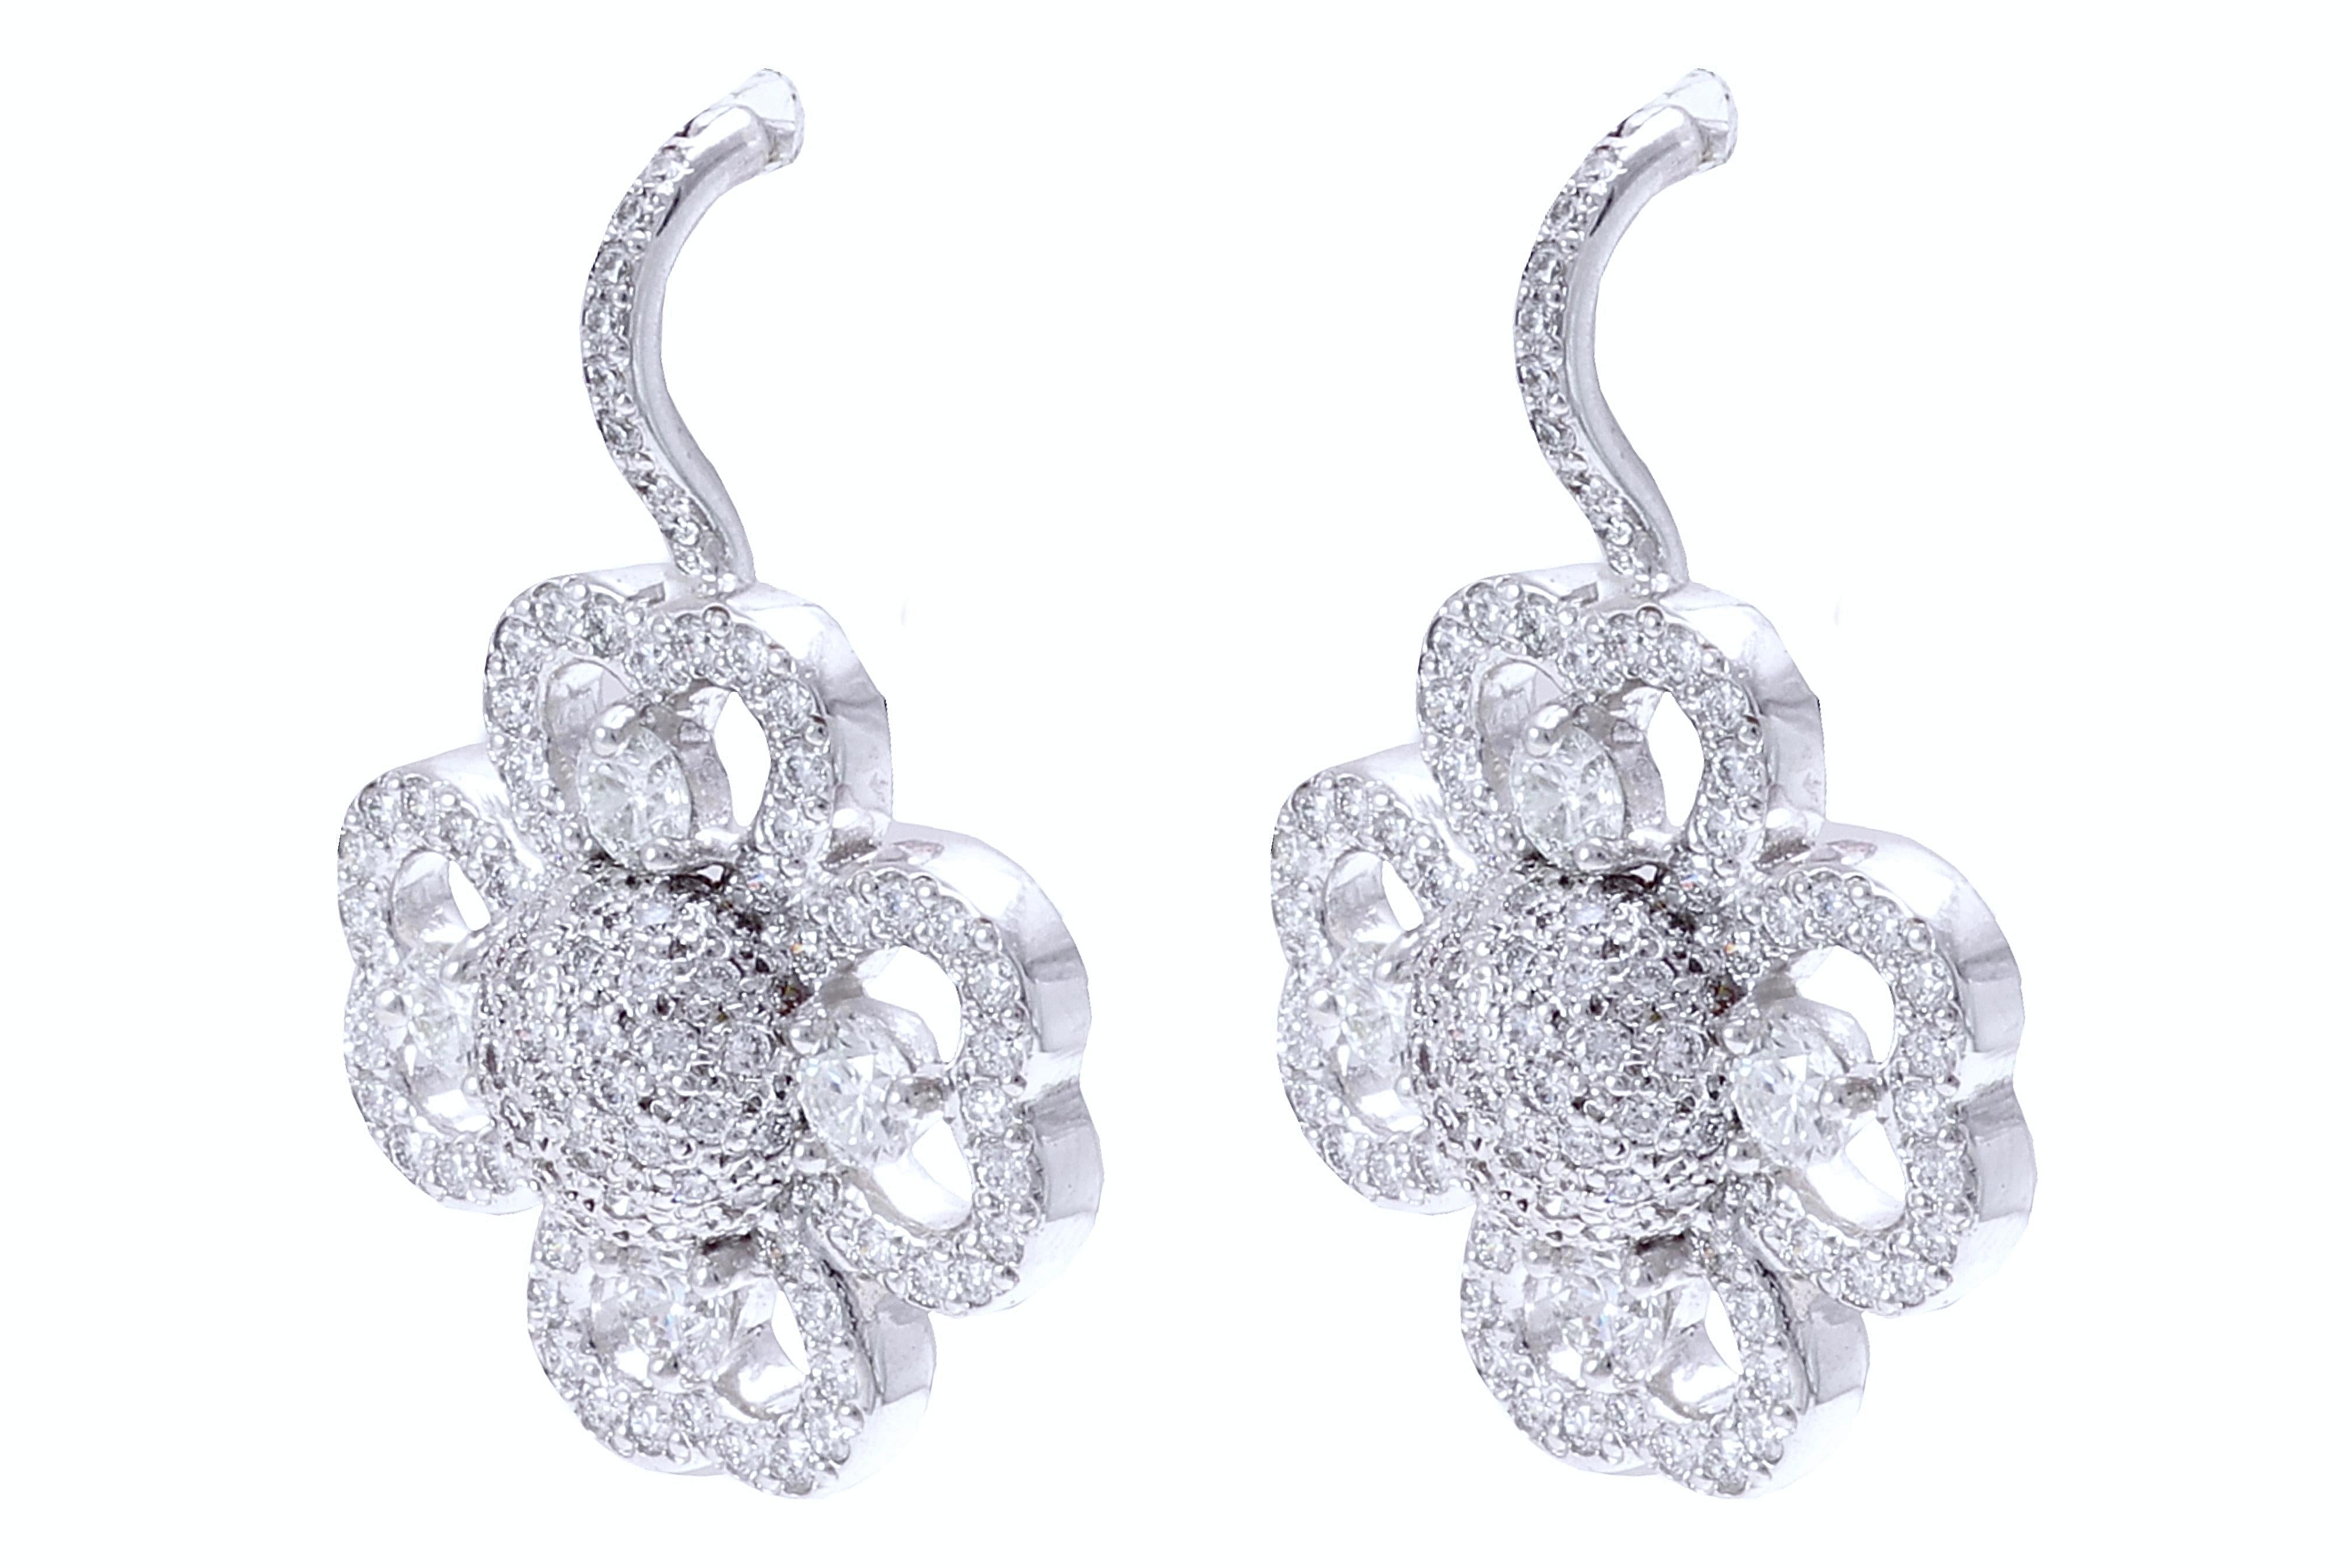 Stunning 18 kt. White Gold Clover Earrings with 1.75 ct. Diamonds 

Diamonds: Brilliant cut diamonds, together approx. 1.75 ct.

Material: 18 kt. white gold

Measurements: 19 mm x 28 mm x 11 mm

Total weight: 9.2 grams / 5.9 dwt / 0.325 oz

Earrings